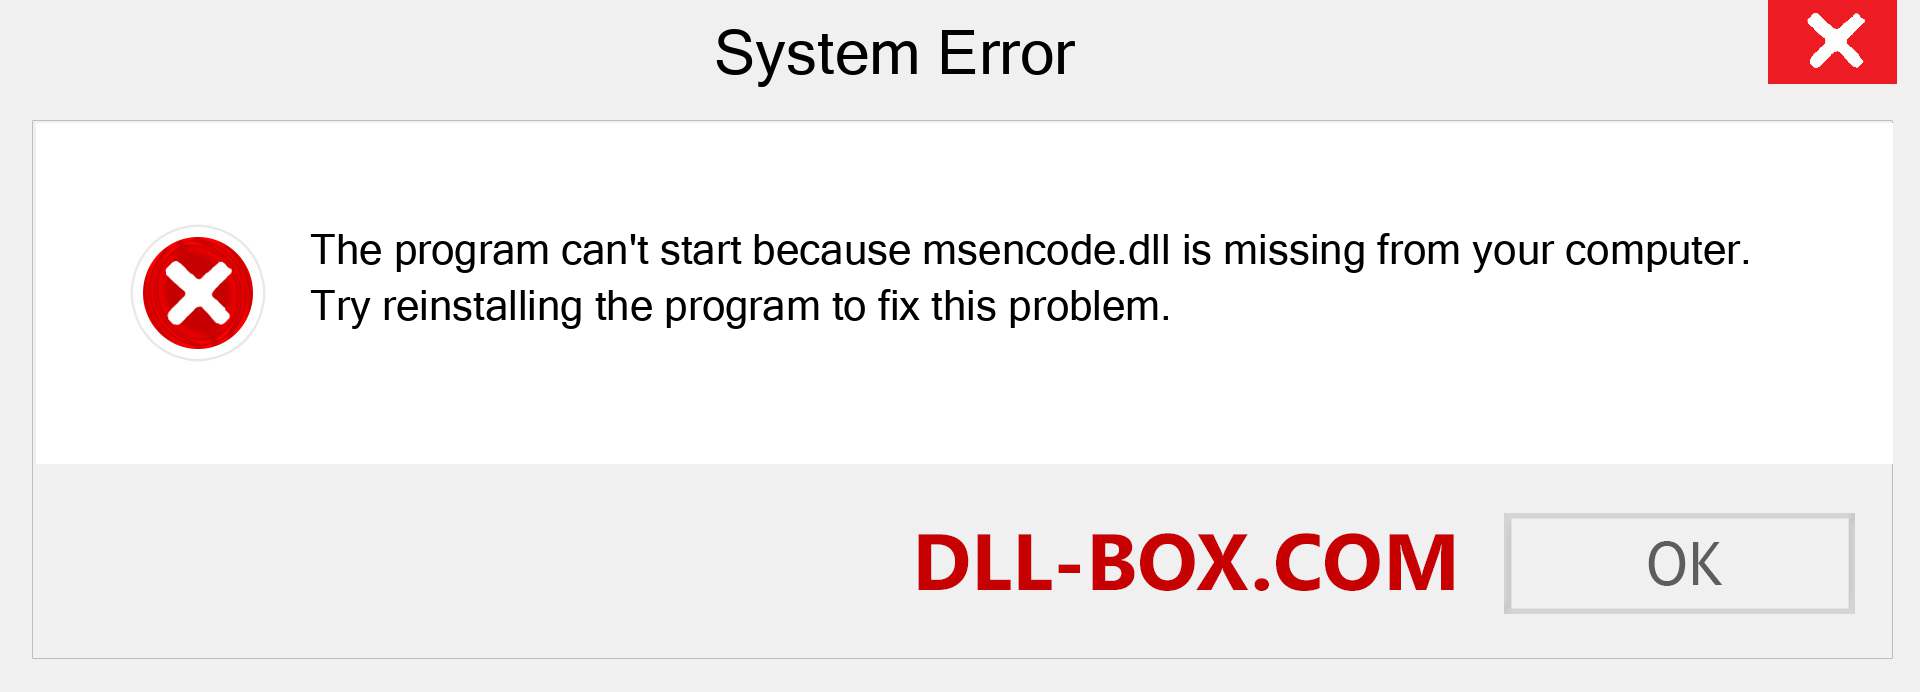  msencode.dll file is missing?. Download for Windows 7, 8, 10 - Fix  msencode dll Missing Error on Windows, photos, images